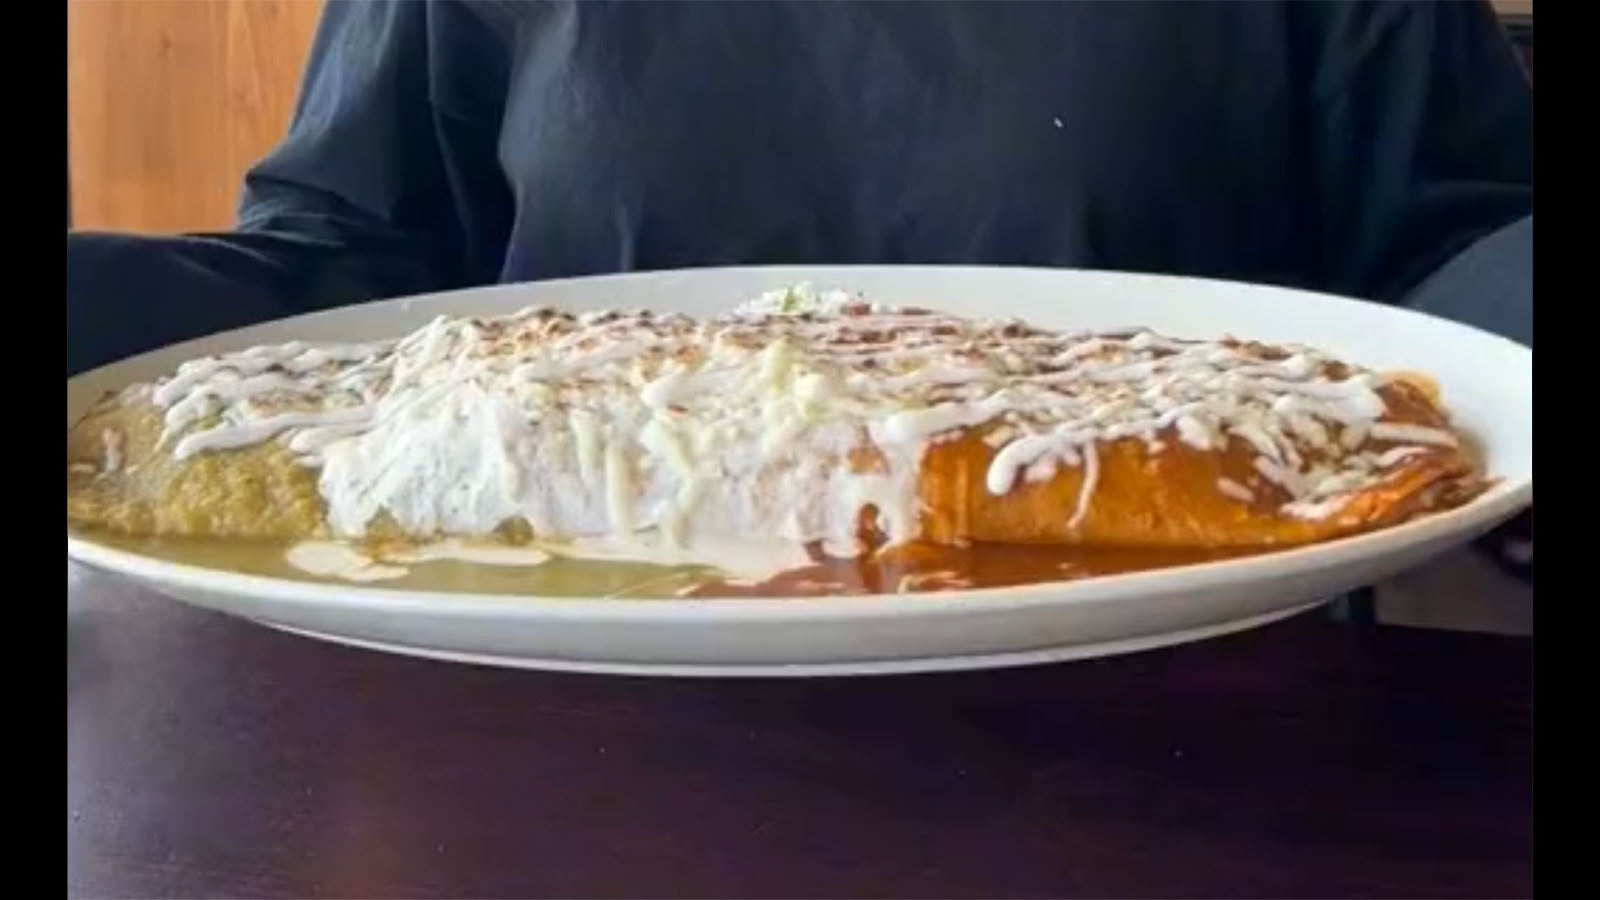 The 5-pound burrito at Michael's Tacos in Cody, Wyoming.